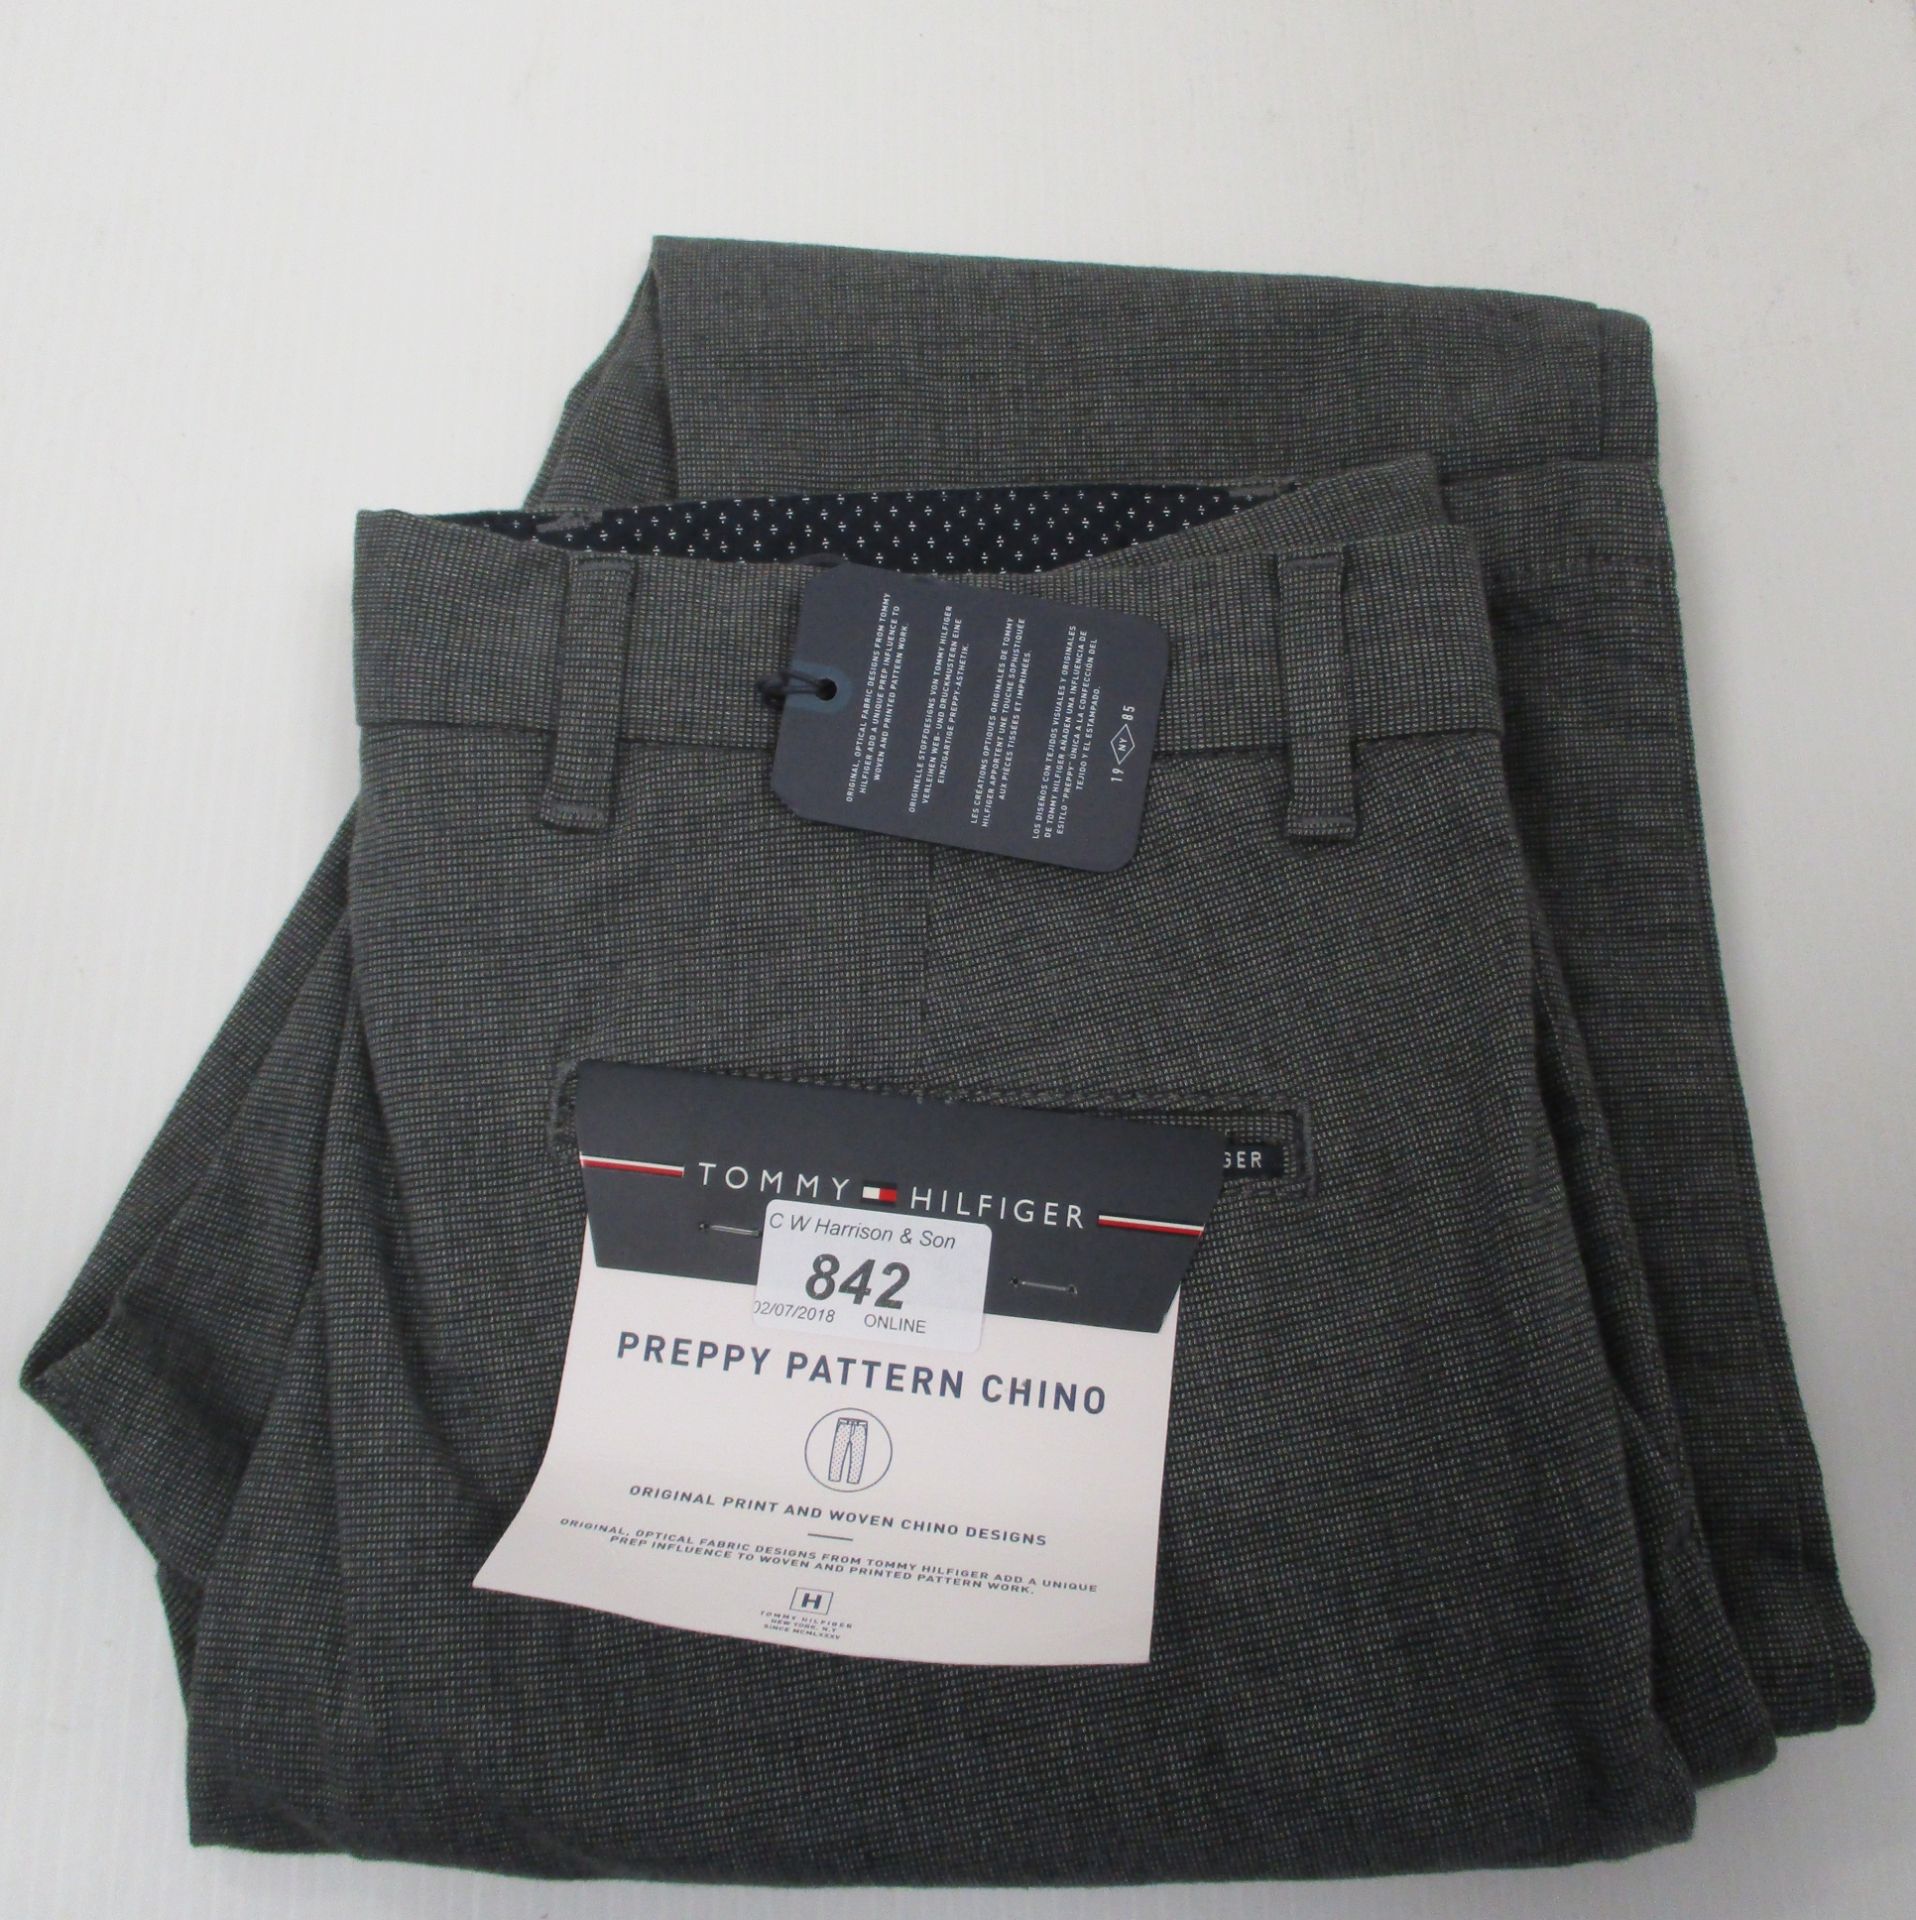 Tommy Hilfiger Preppy pattern chino trousers - 30R RRP £115